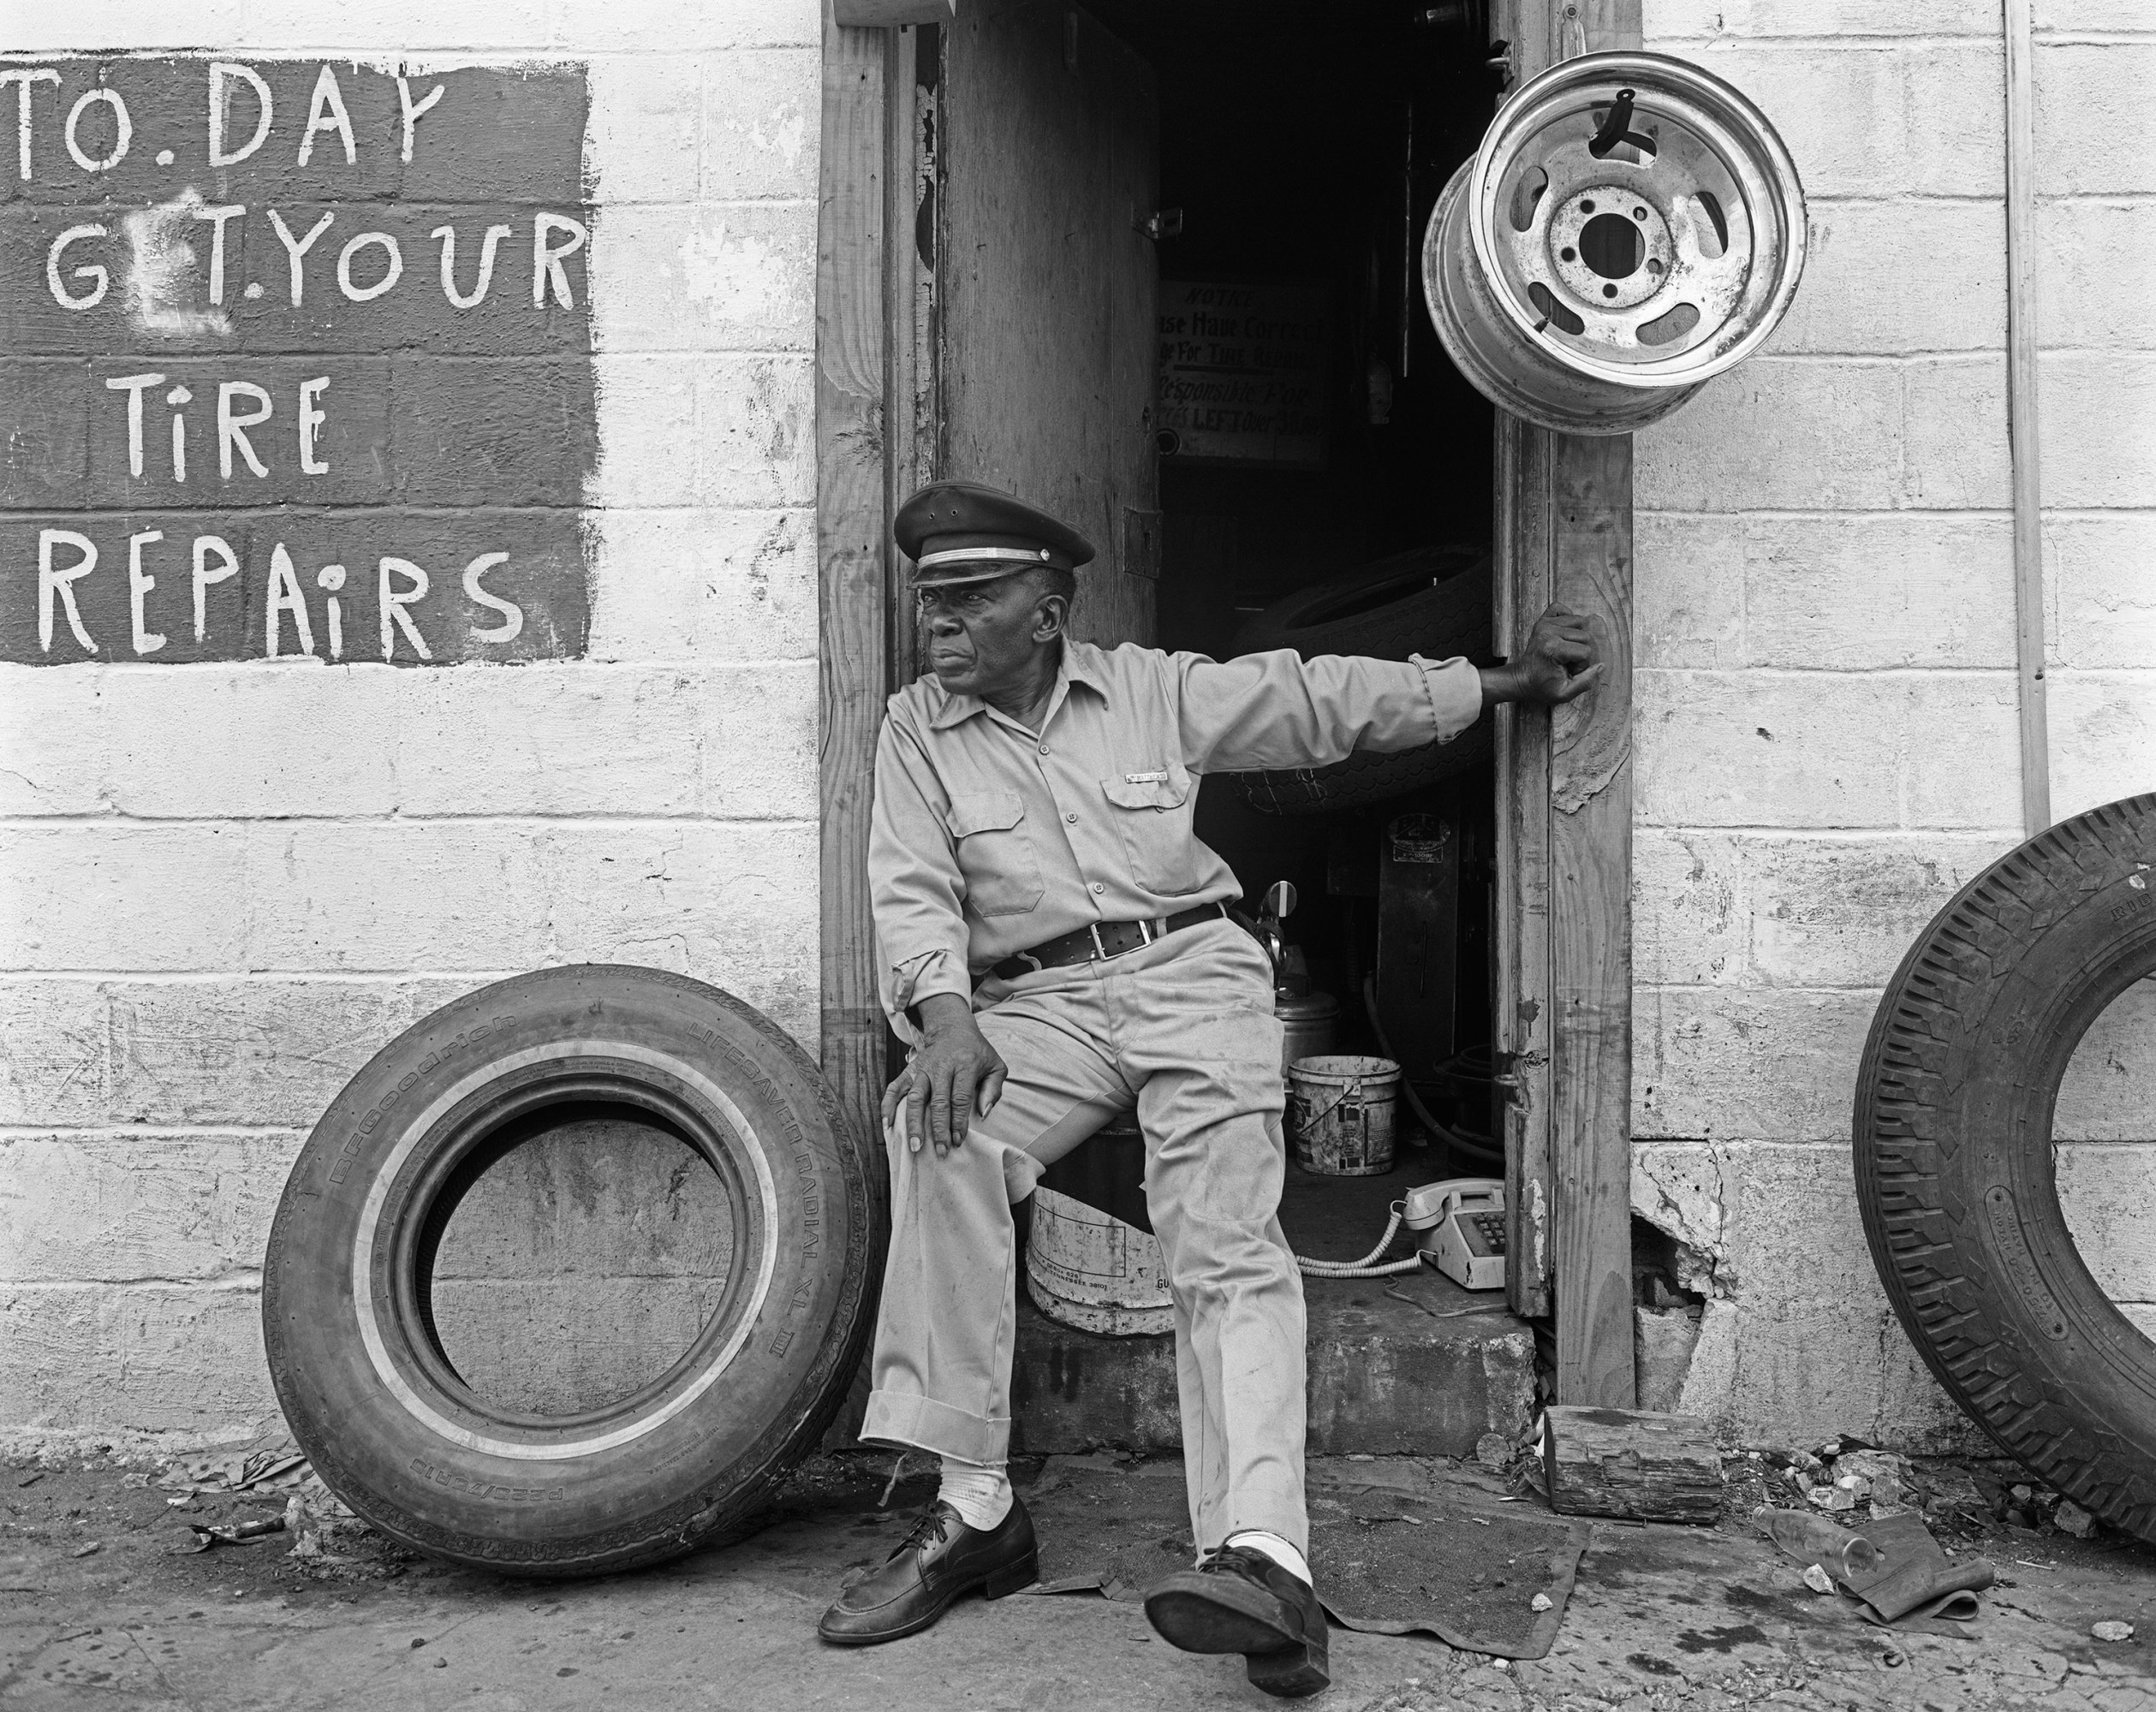 Man sits on a stoop between two tires. painted on the side of the building is a sign that reads, "To. Day Get. Your Tire Repairs"